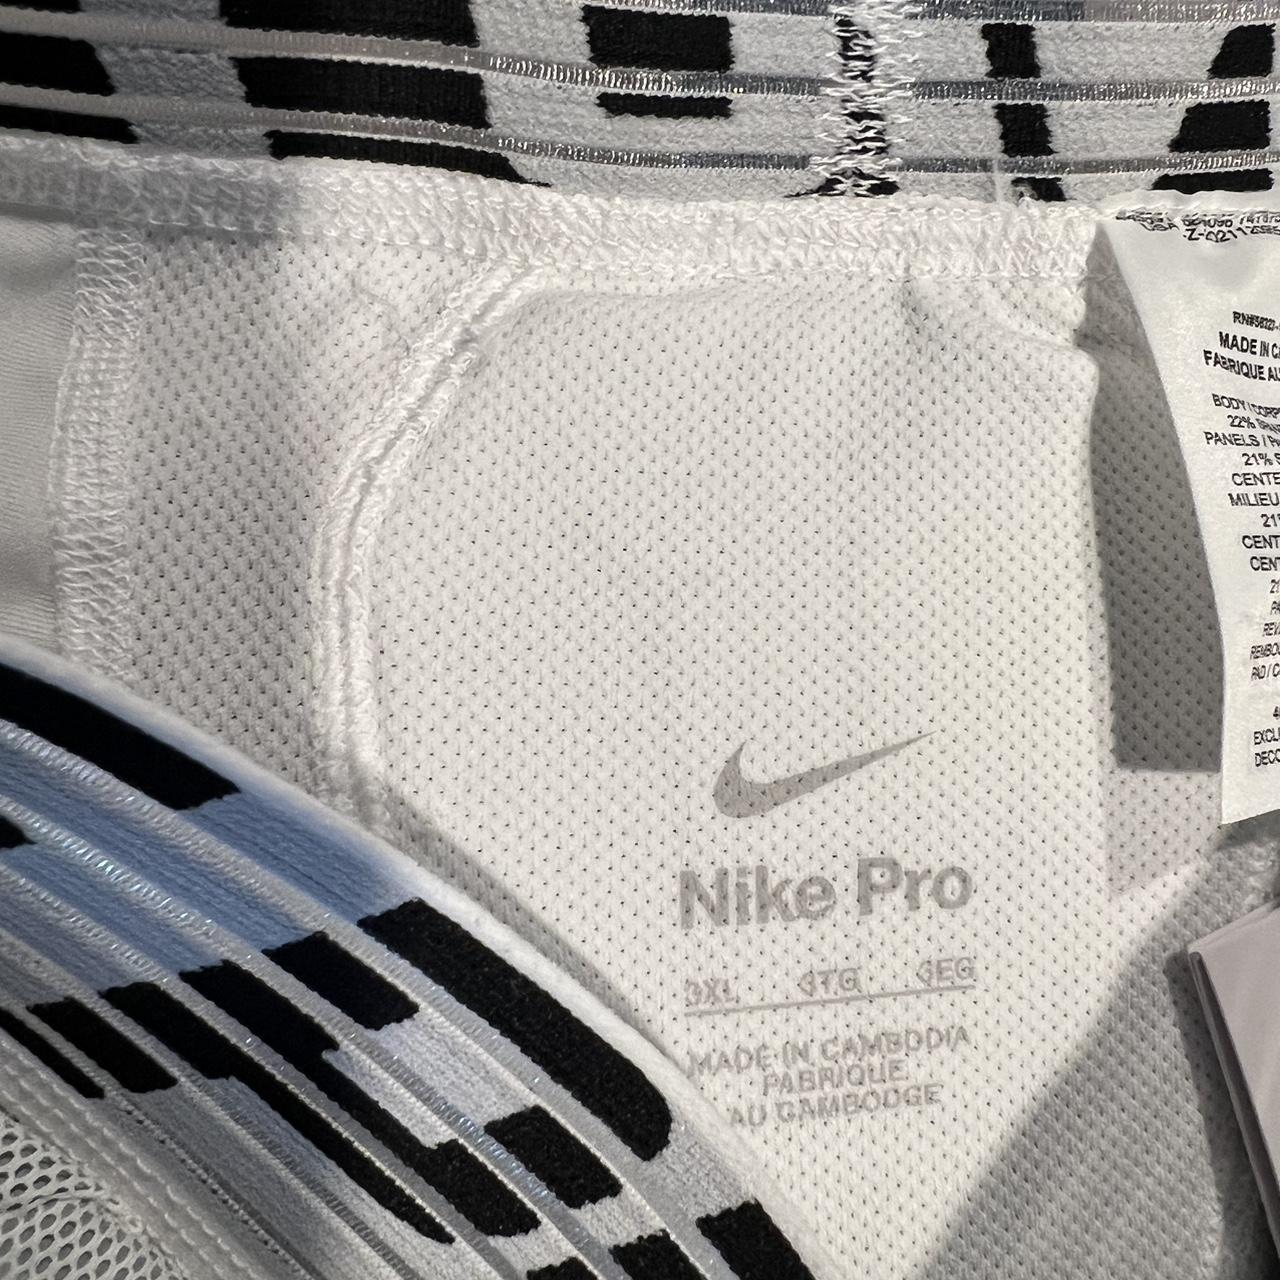 Nike Pro Hyperstrong Padded Compression Football Shorts AQ0751-021